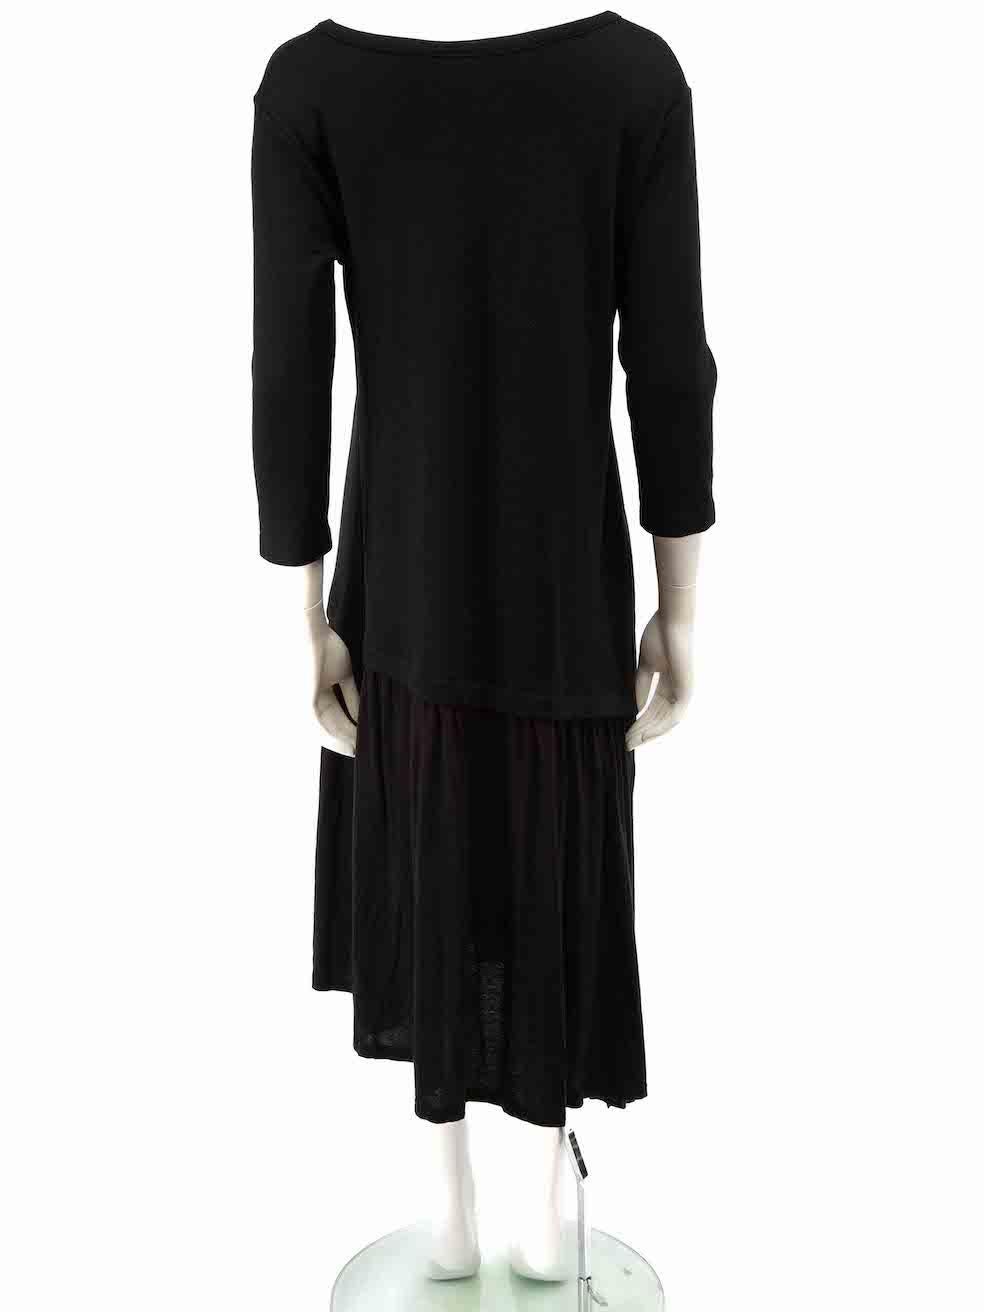 Yohji Yamamoto Y's by Yohji Yamamoto Black Wool Ruffle Accent Midi Dress Size S In Excellent Condition For Sale In London, GB